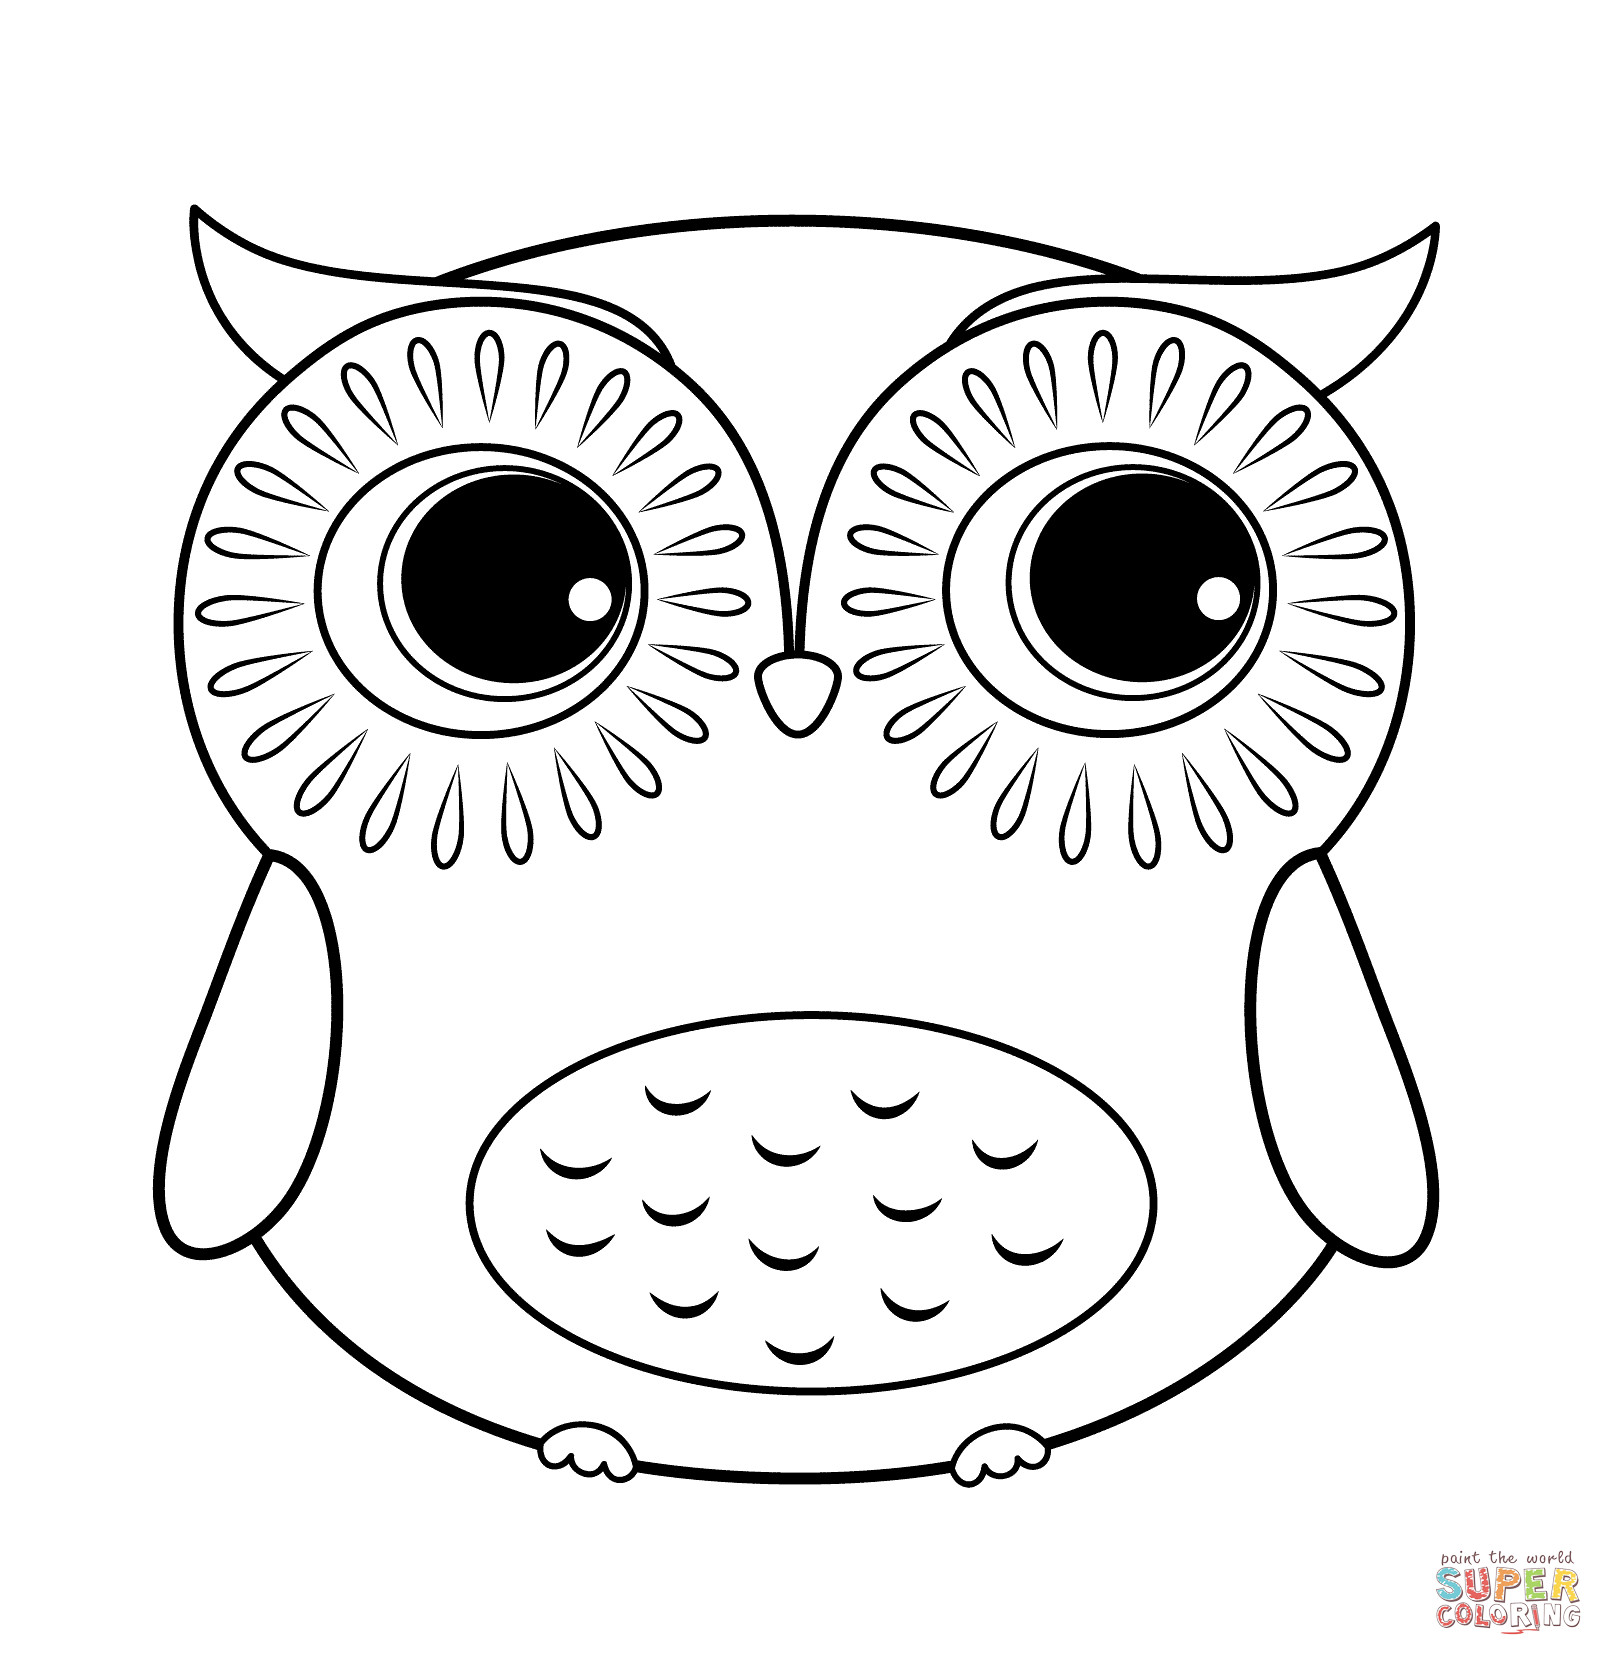 Owl Coloring Pages Printable
 Cartoon Owl coloring page